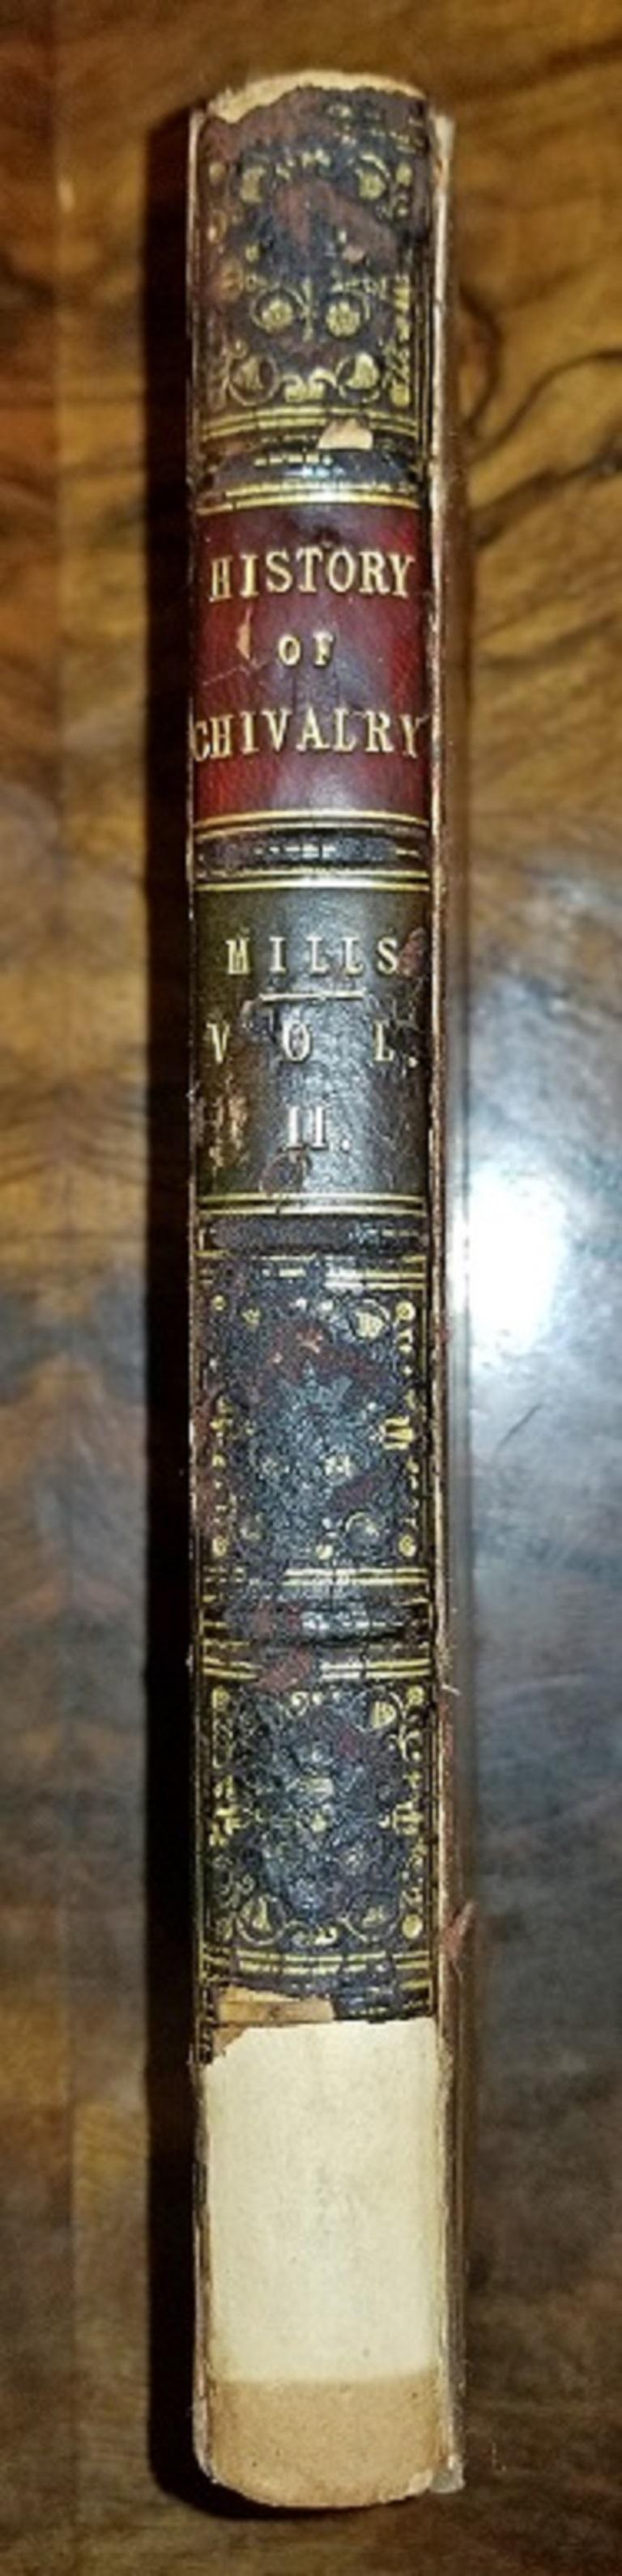 History of Chivalry in 2 Vols by Charles Mills 1825 5